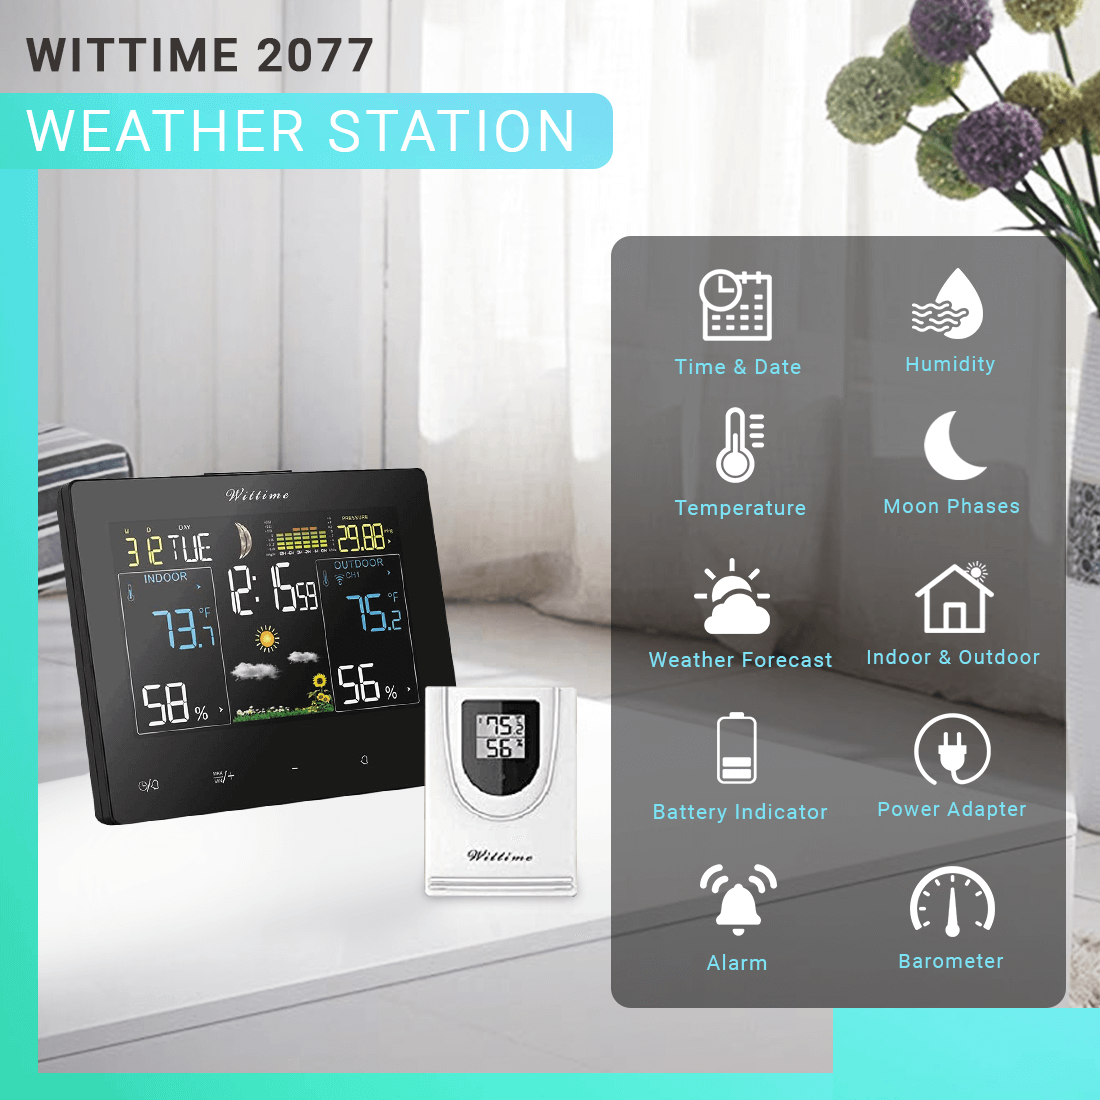 3P5CQB3 Wittime 2079 Indoor Outdoor Thermometer, Weather Station,Digital  Inside Outside Temperatur Monitor, Indoor Humidity Room